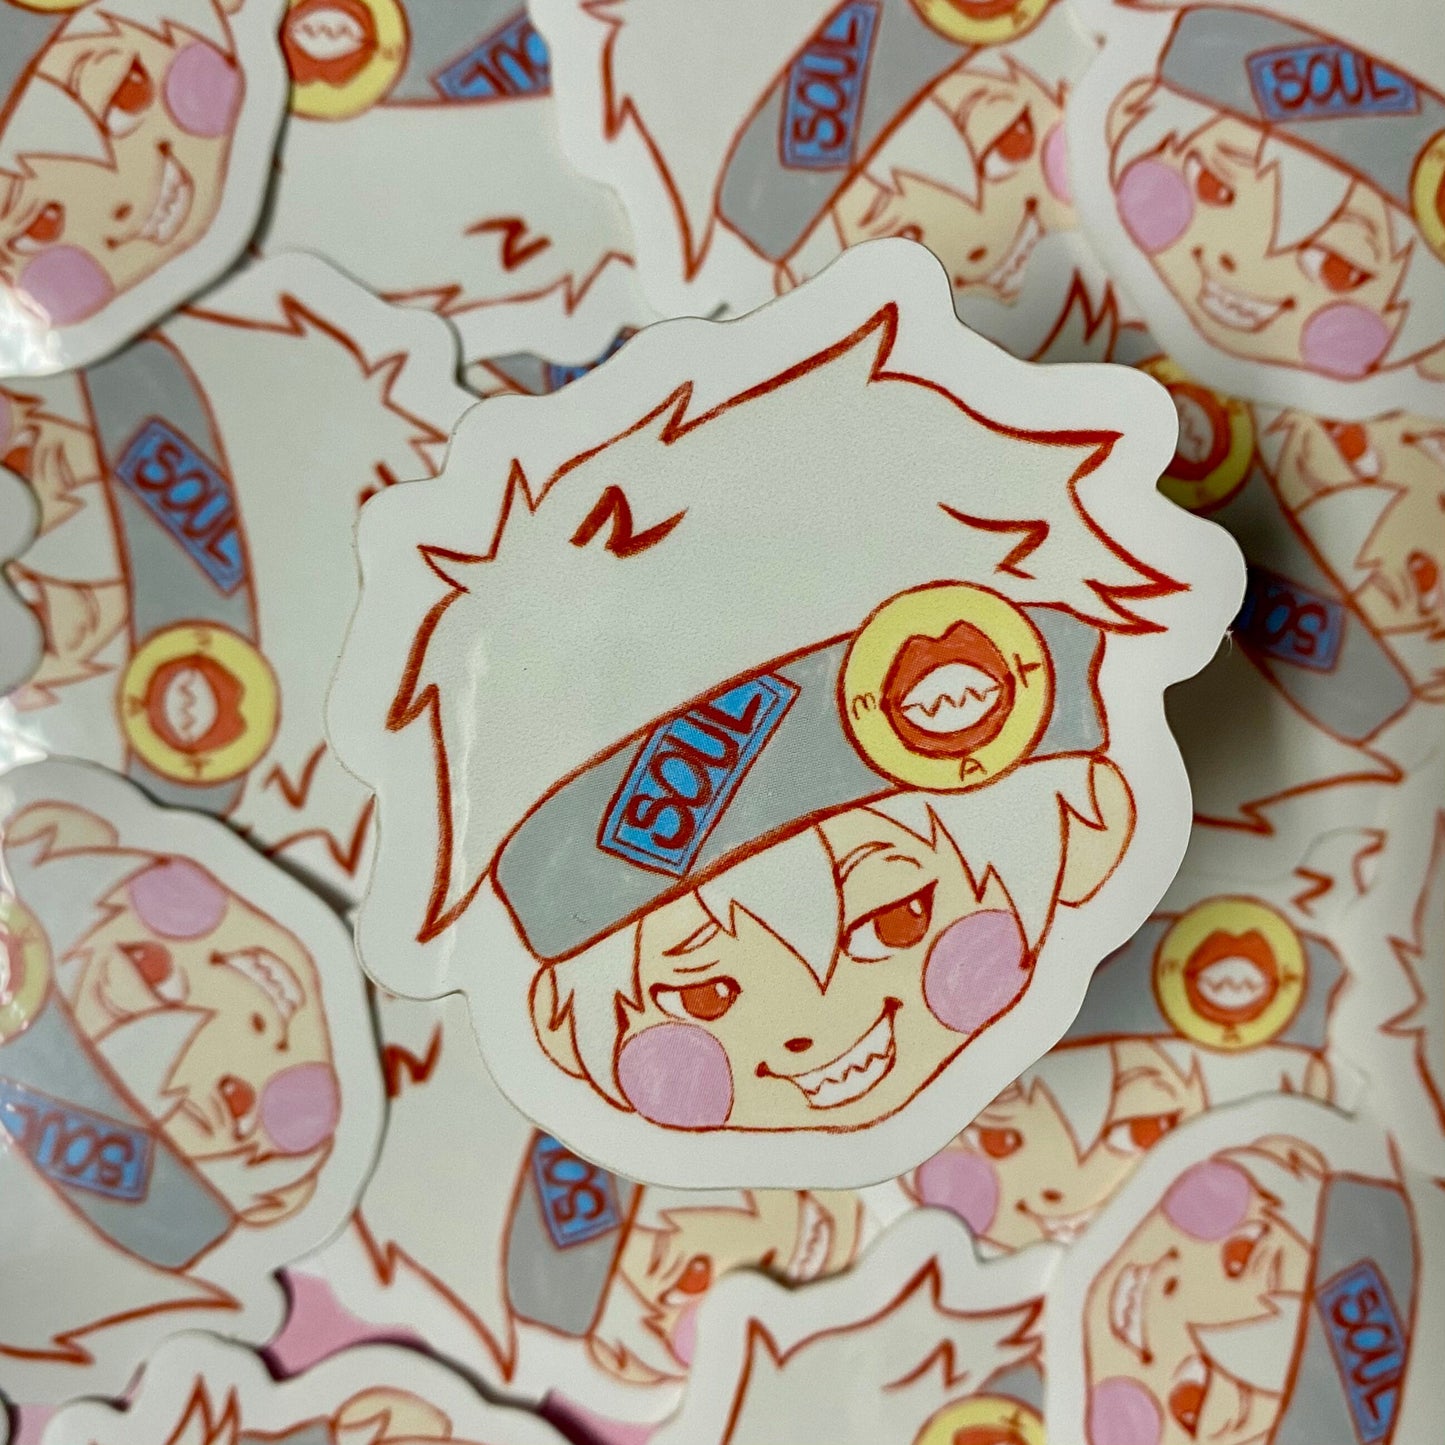 Chibi Soul Eater Sticker Pack (8 Stickers!!)